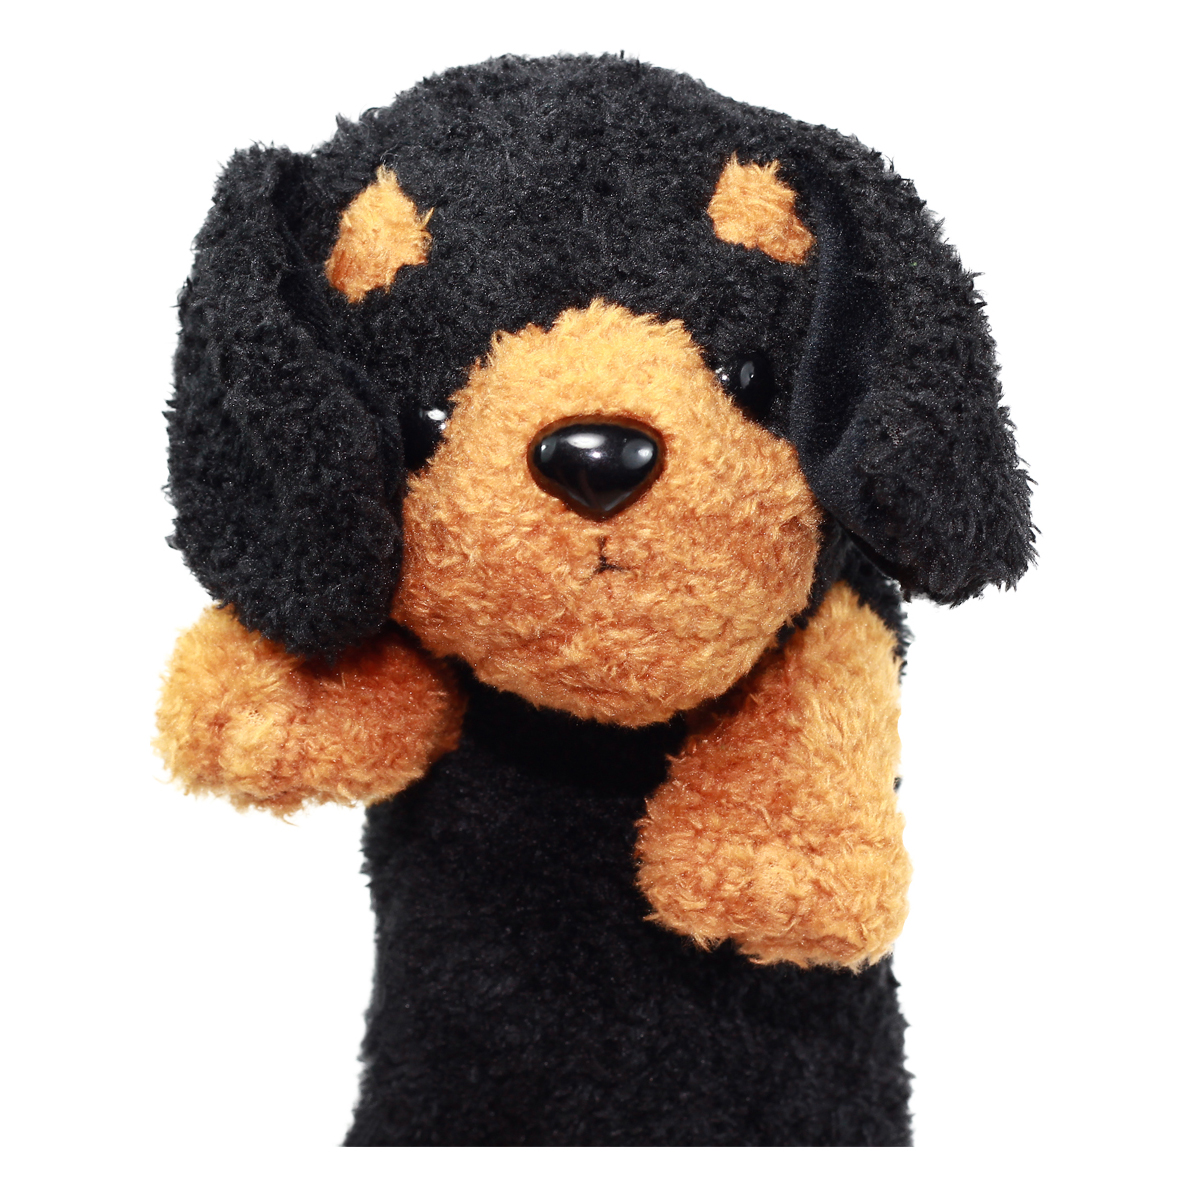 Dog Pencil Case Pouch Stuffed Animal Back To School Collection Fluffy Black Brown Dachshund Plush 10 Inches